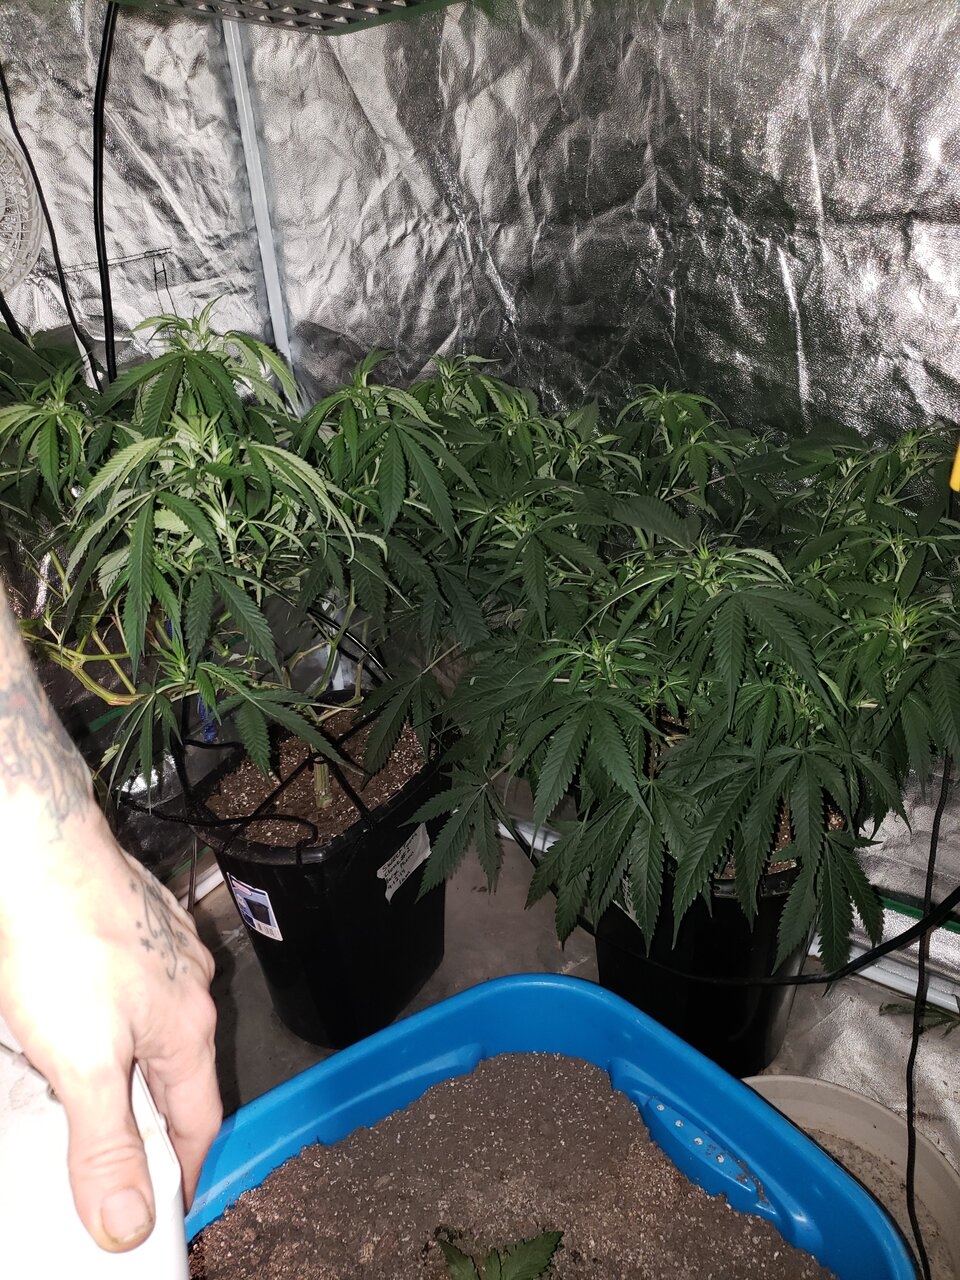 Both Sweet Tooth tall an small pheno in veg